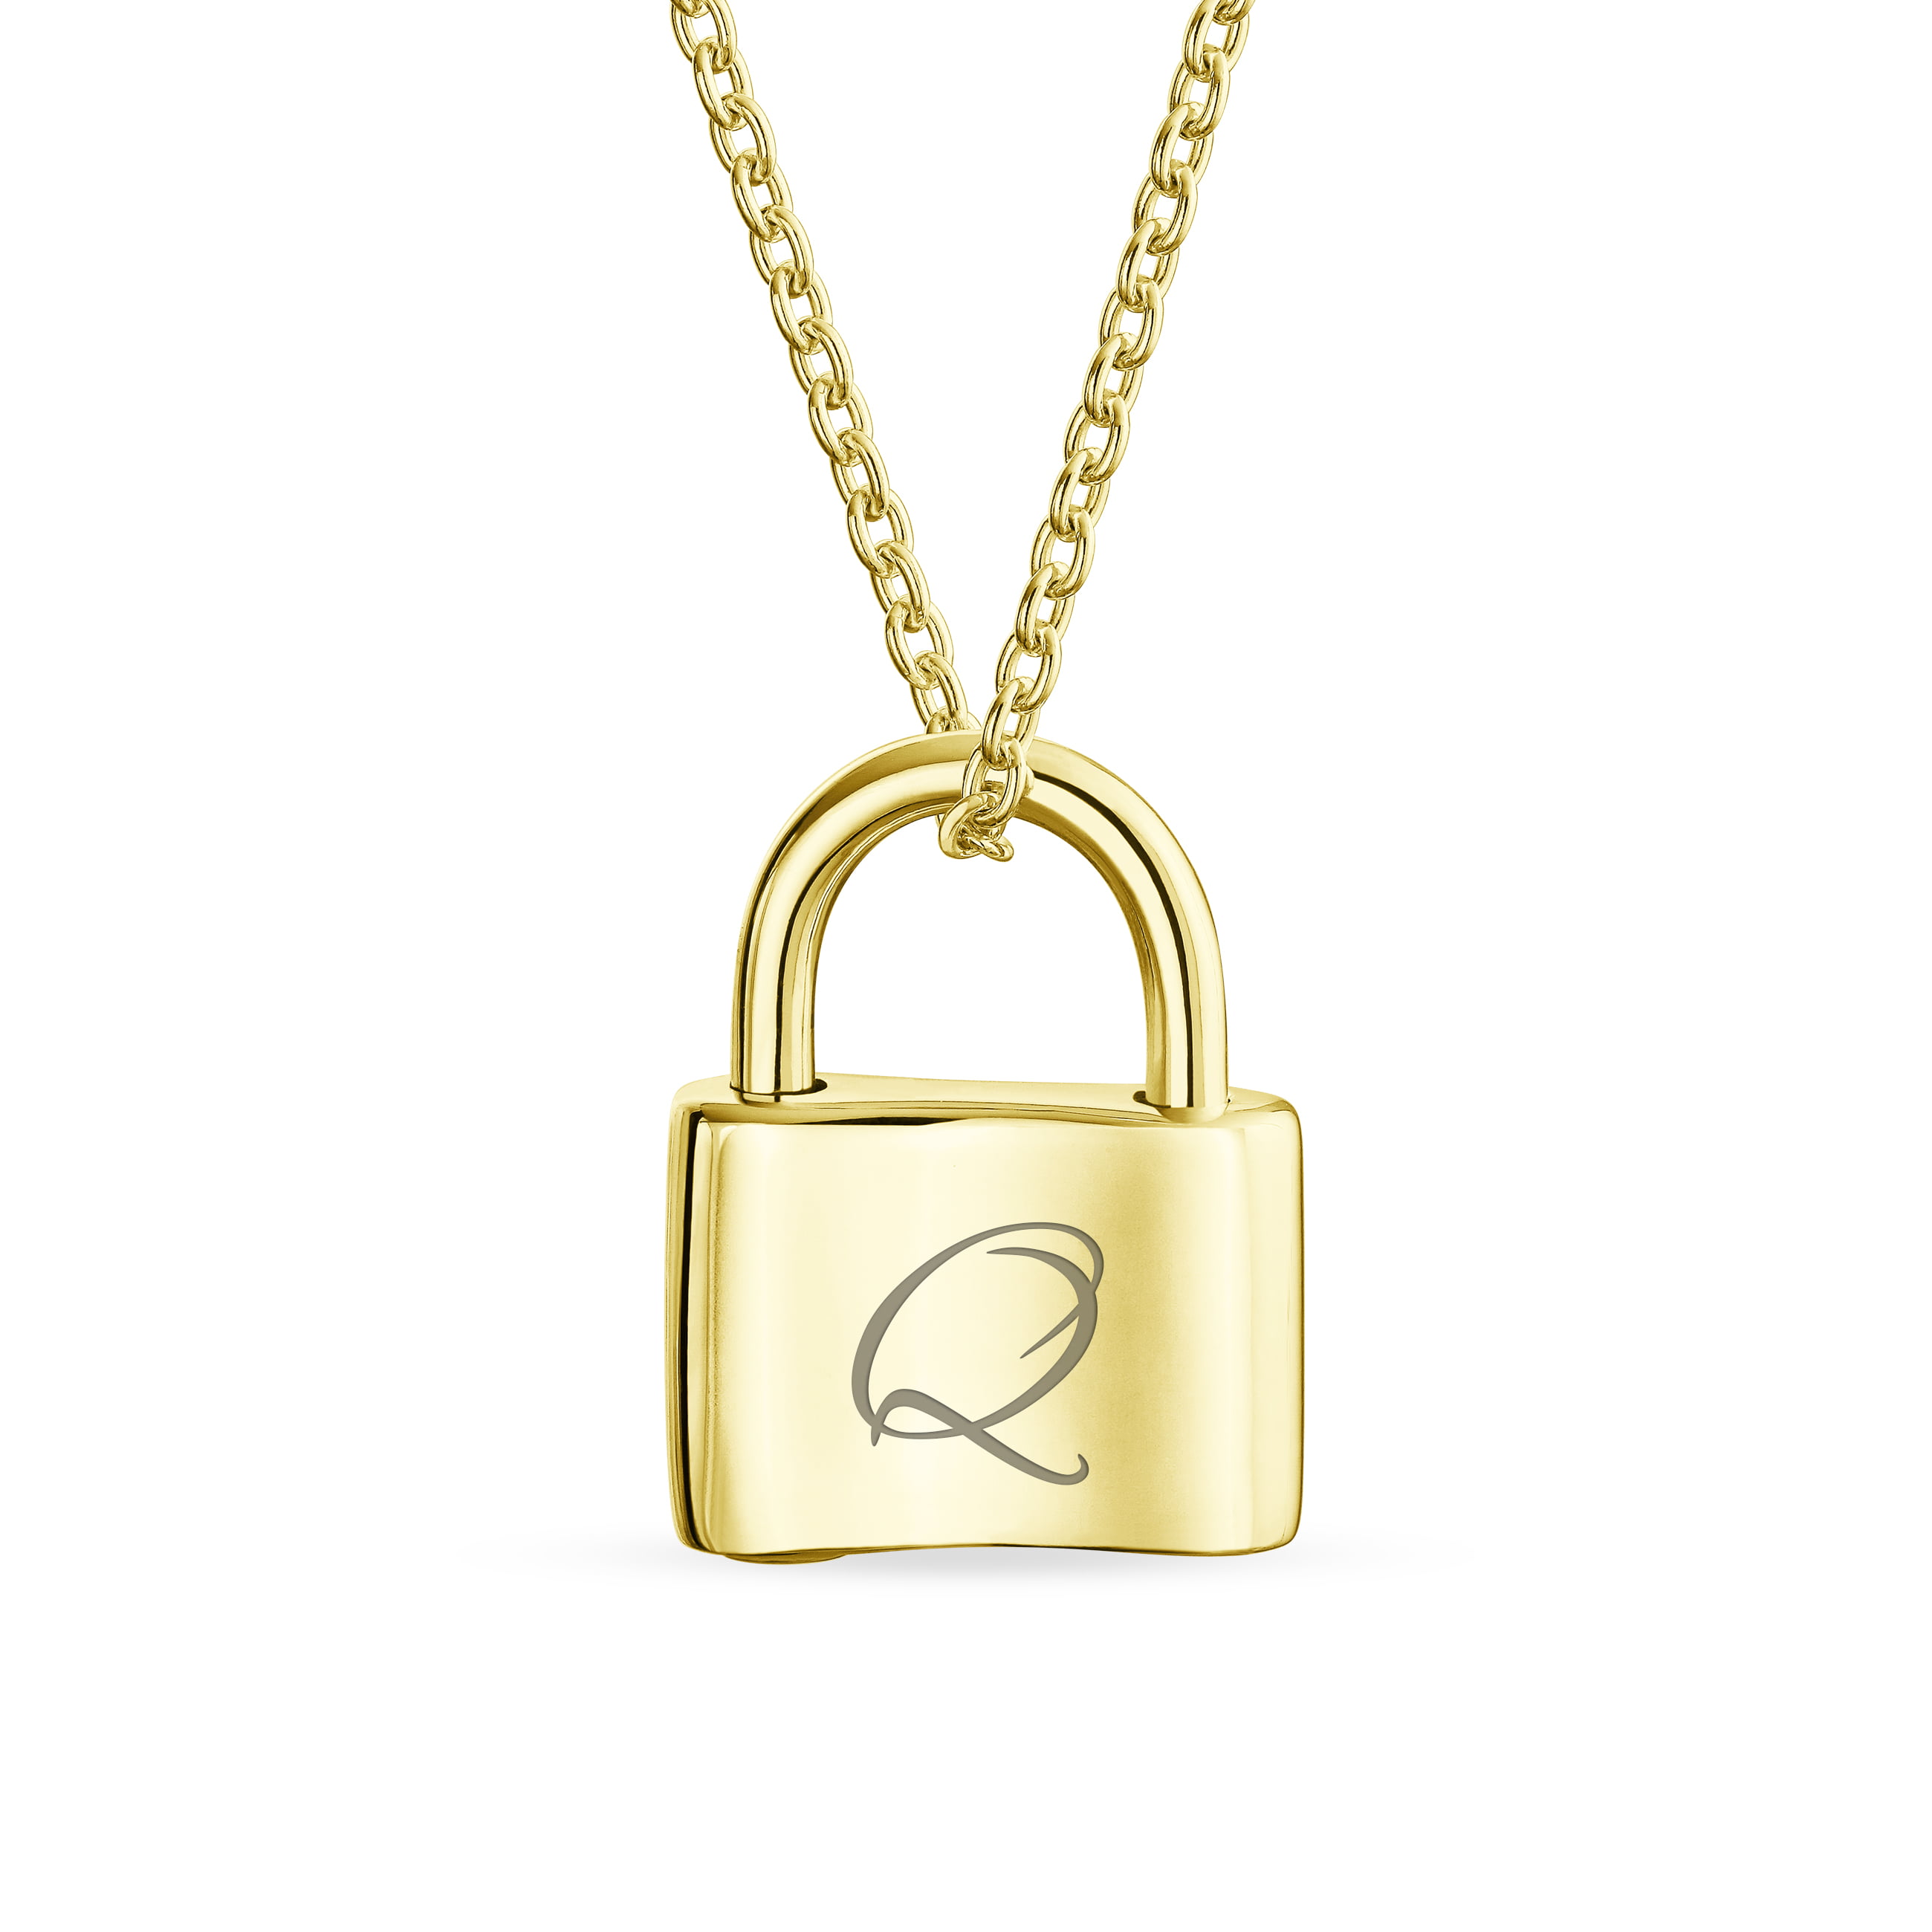 Tiny Lock Necklace Padlock Charm for Women, Dainty Padlock Pave CZ 925 Silver, Gold Lock Jewelry Gifts for Her, Sterling Silver